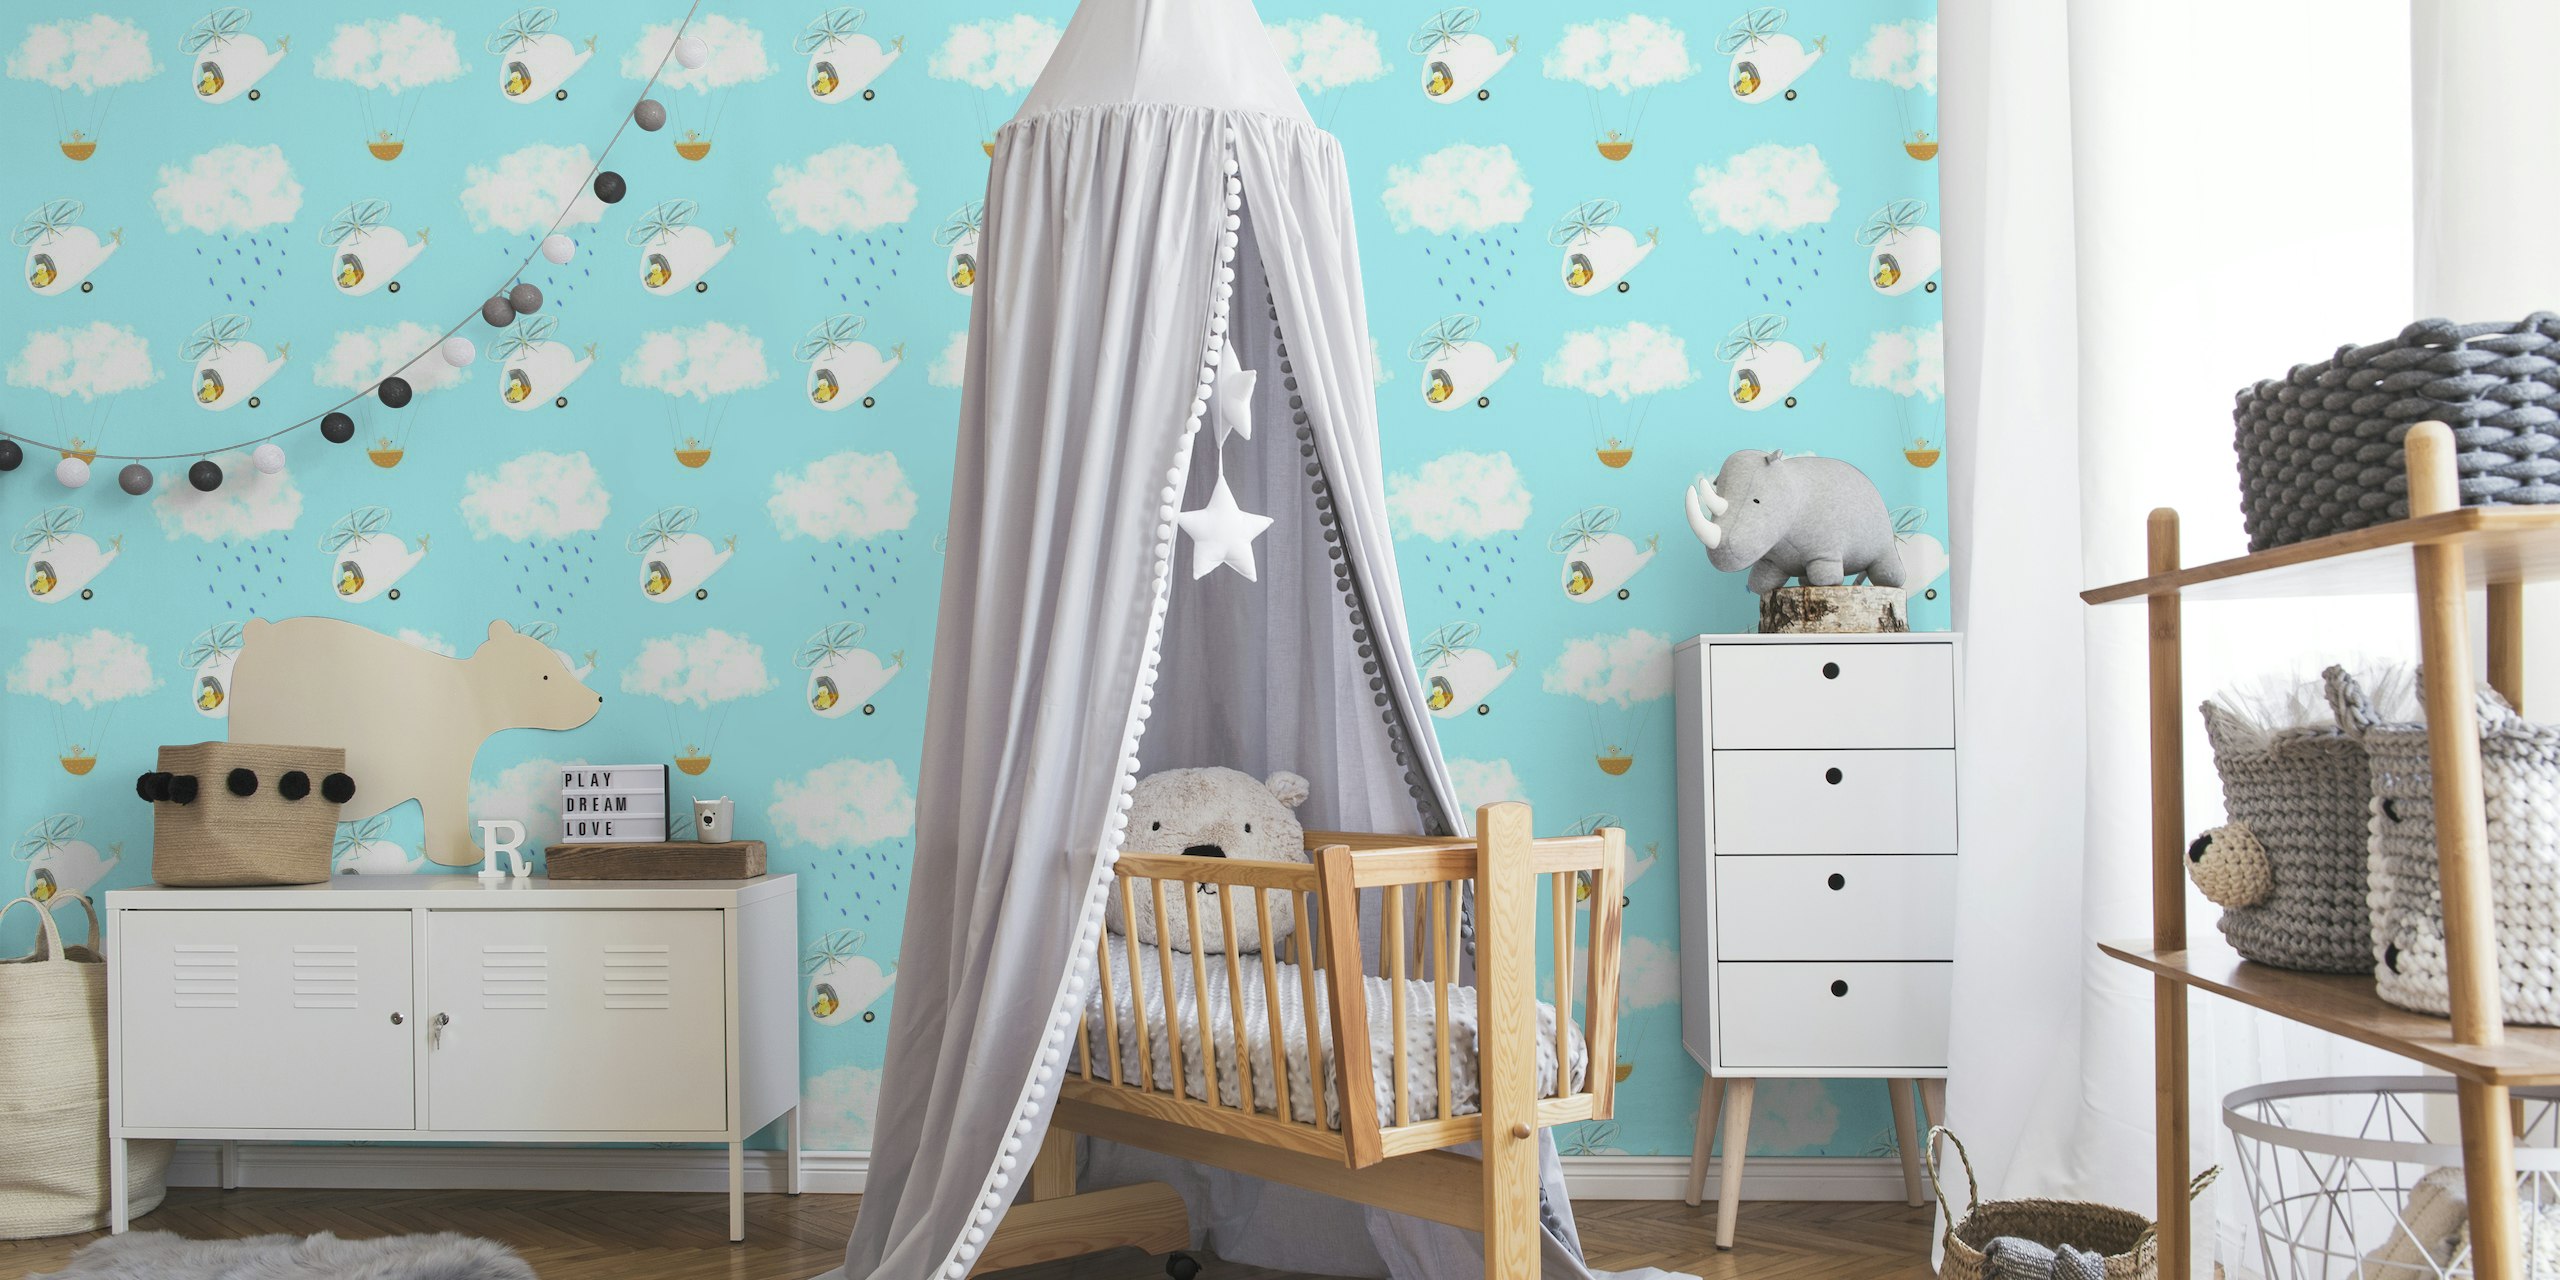 Clouds and helicopters for the kidsroom tapeta